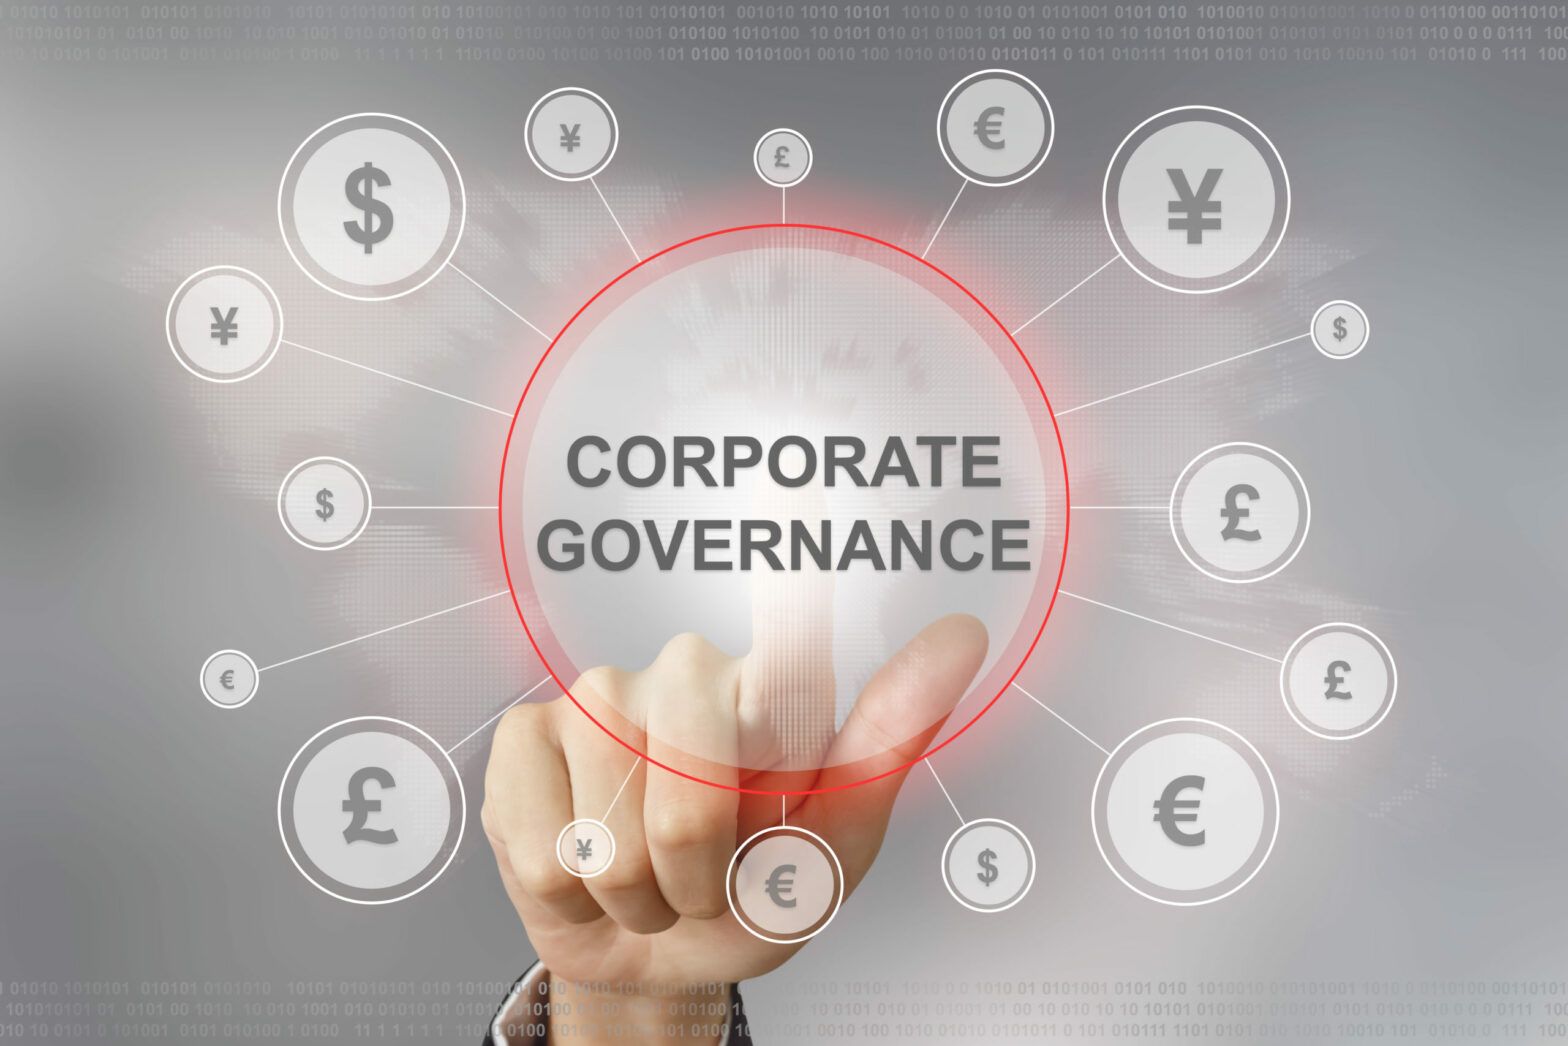 How is corporate governance linked to financial performance?